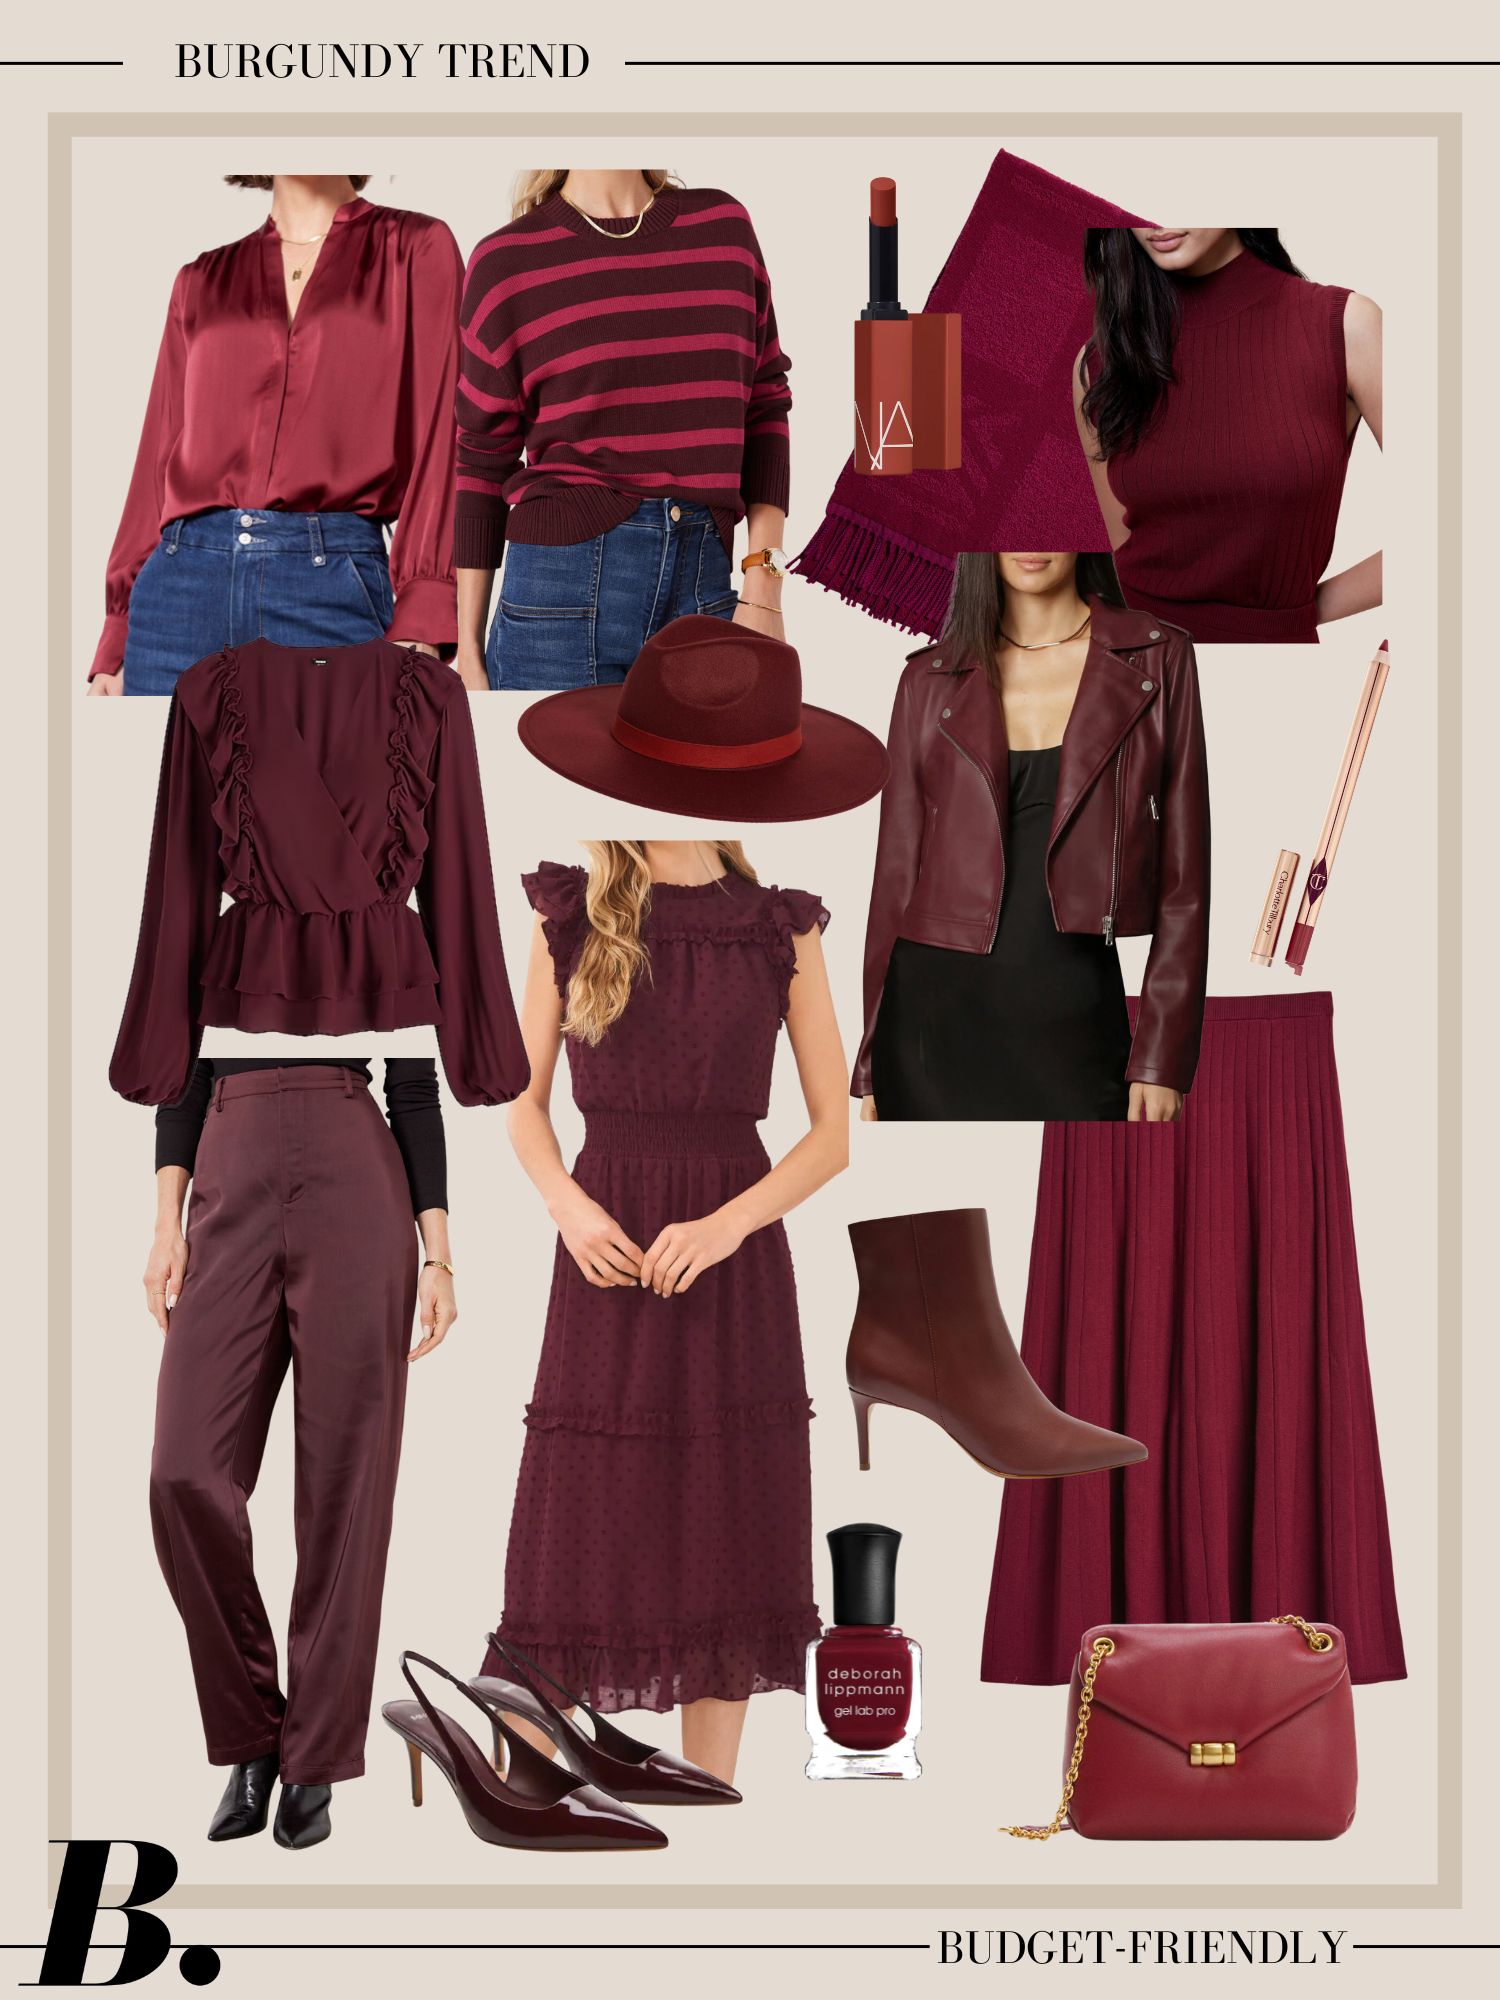 Burgundy trends, burgundy fall fashion finds, burgundy finds, burgundy fashion burgundy favorites, affordable burgundy finds, red trend, red fashion trend, fall color trend, erin busbee, busbee style, fashion over 40